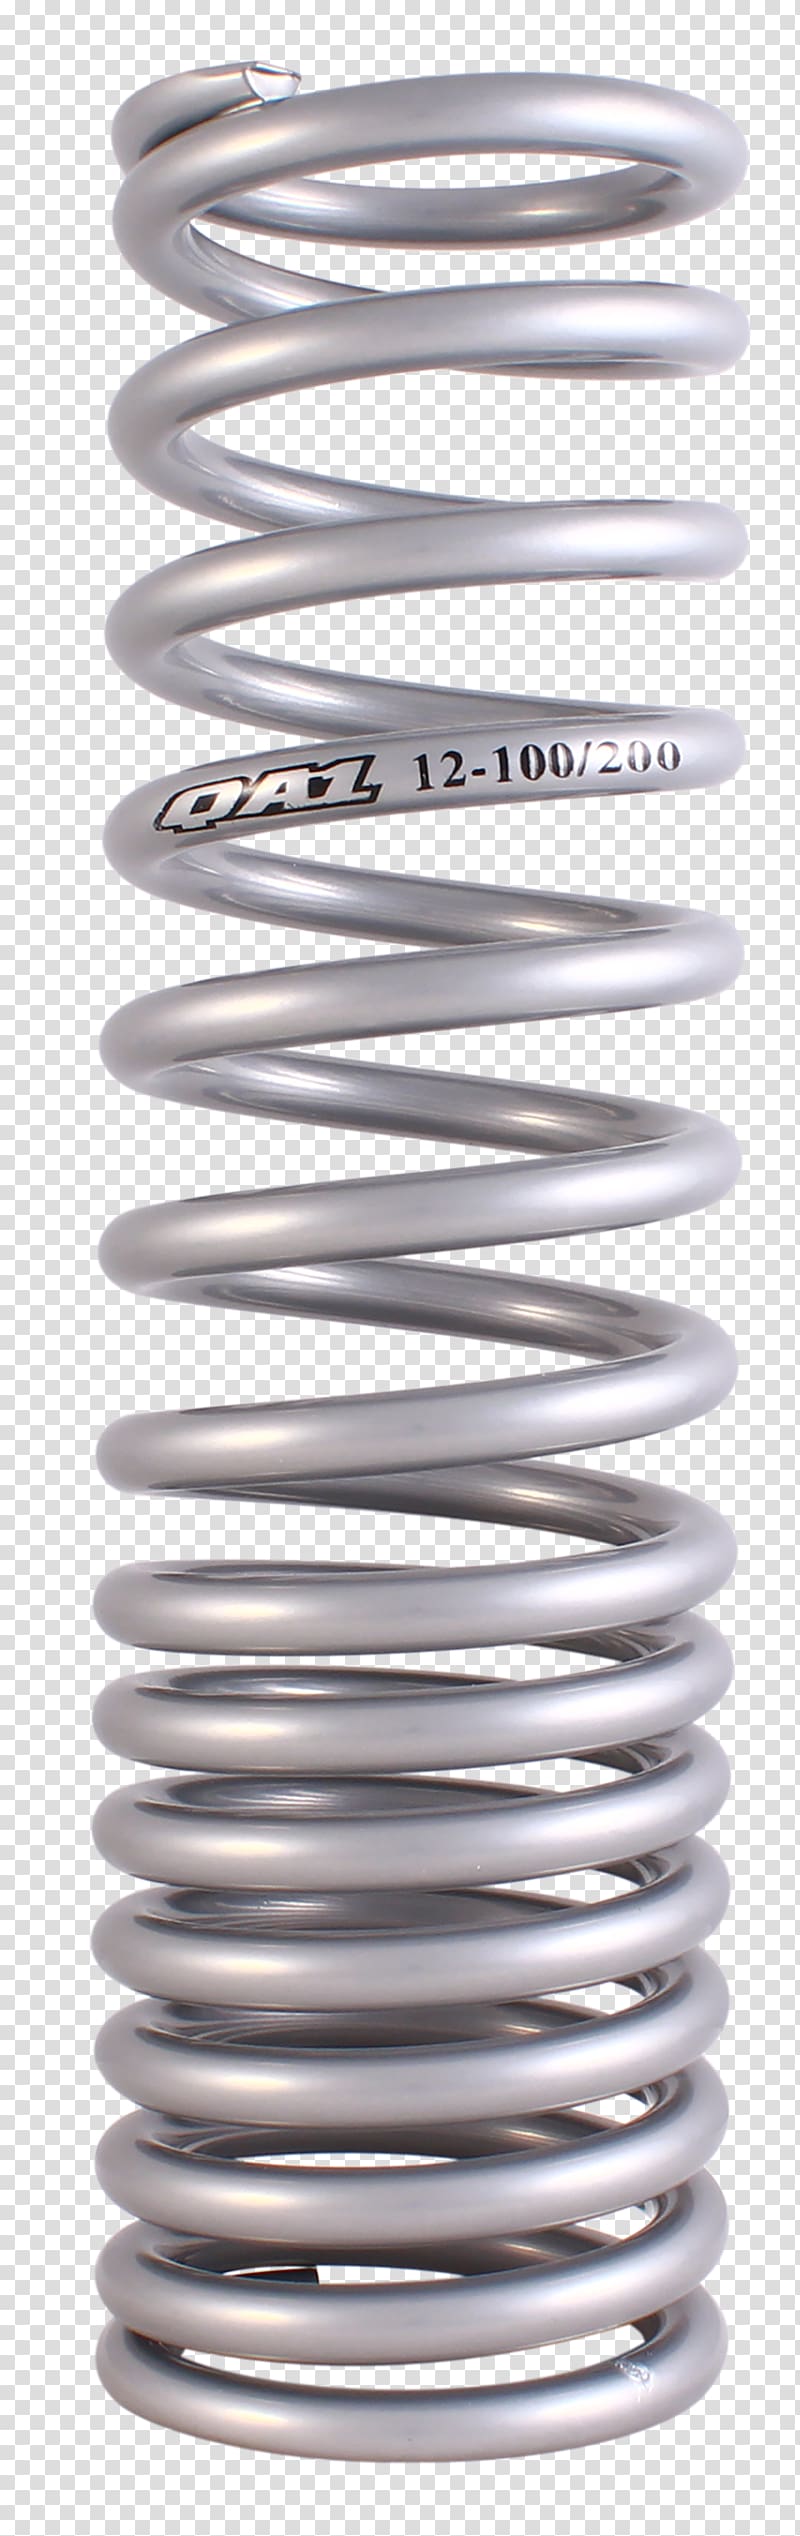 QA1 12-175/350 QA1 Coil Springs Coilover Suspension, transparent background PNG clipart